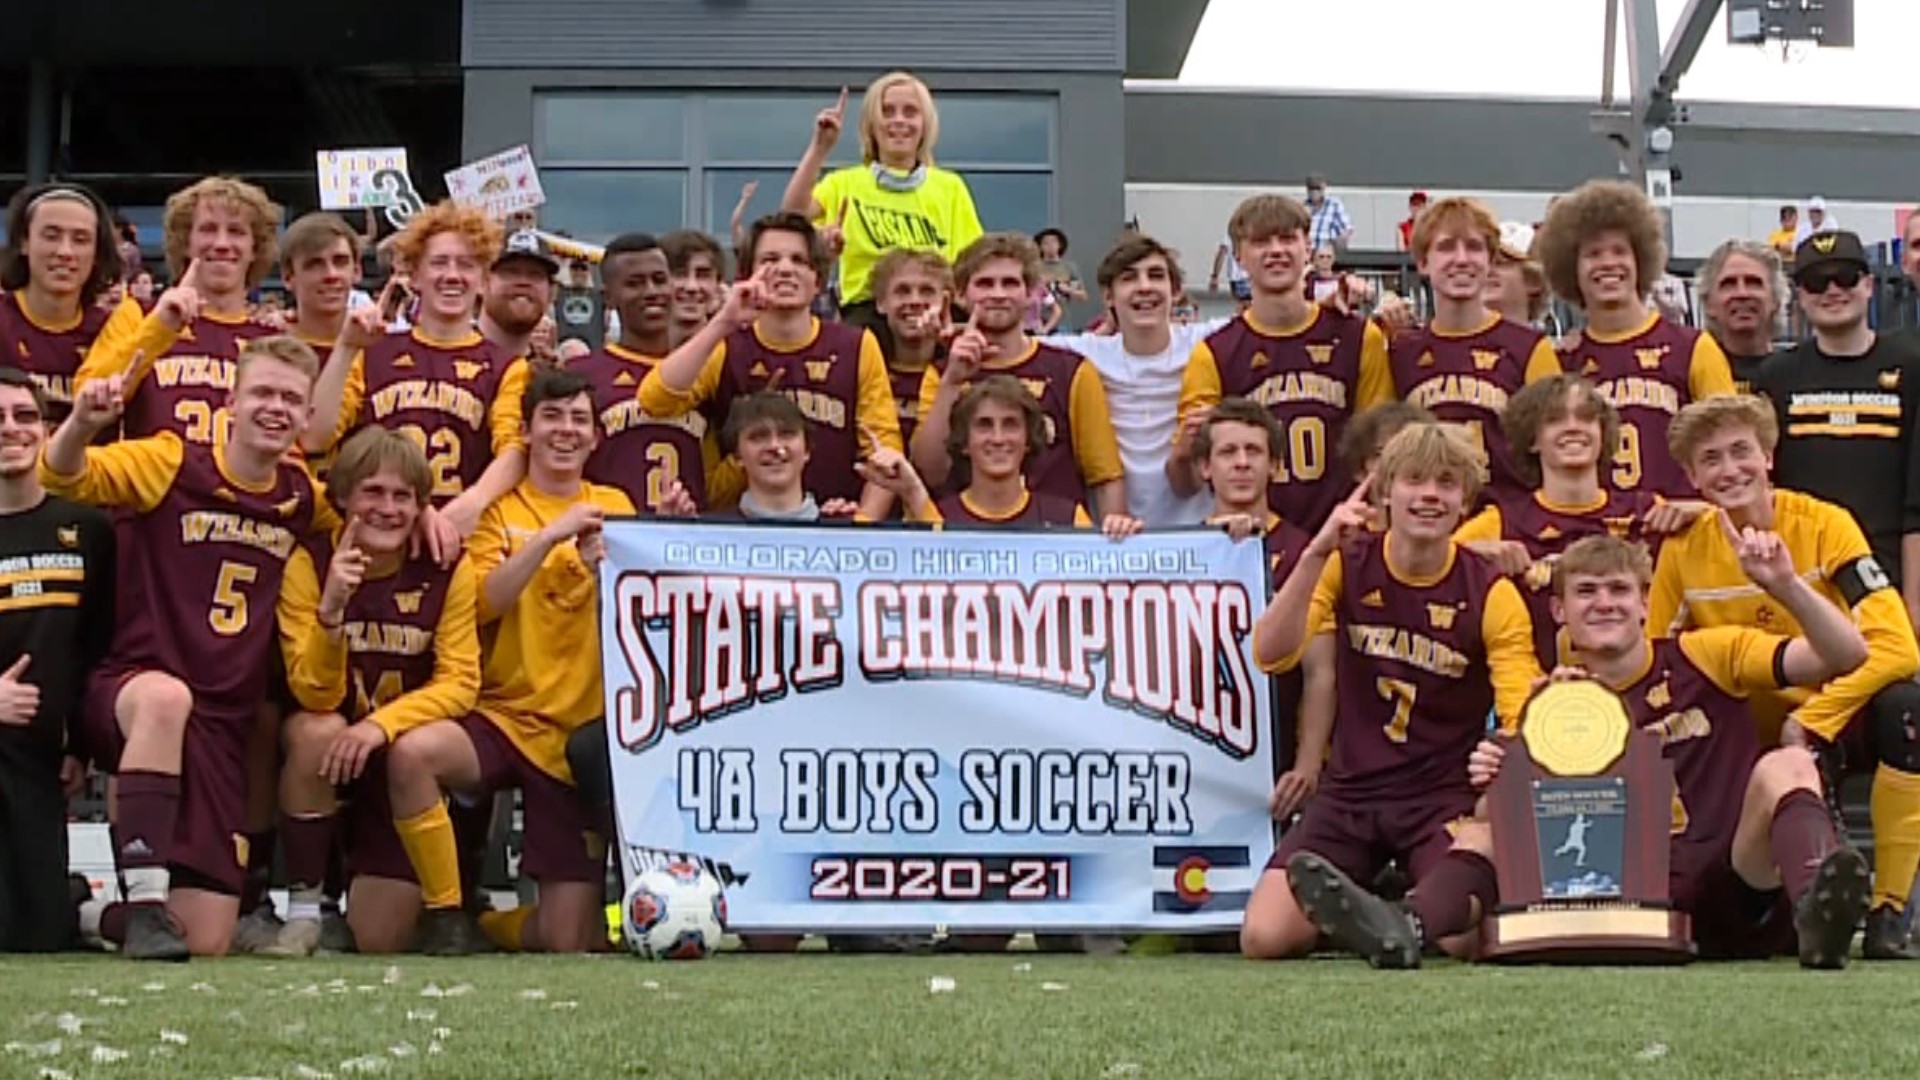 The Wizards defeated Denver North 1-0 in the Class 4A state championship game on Saturday afternoon.